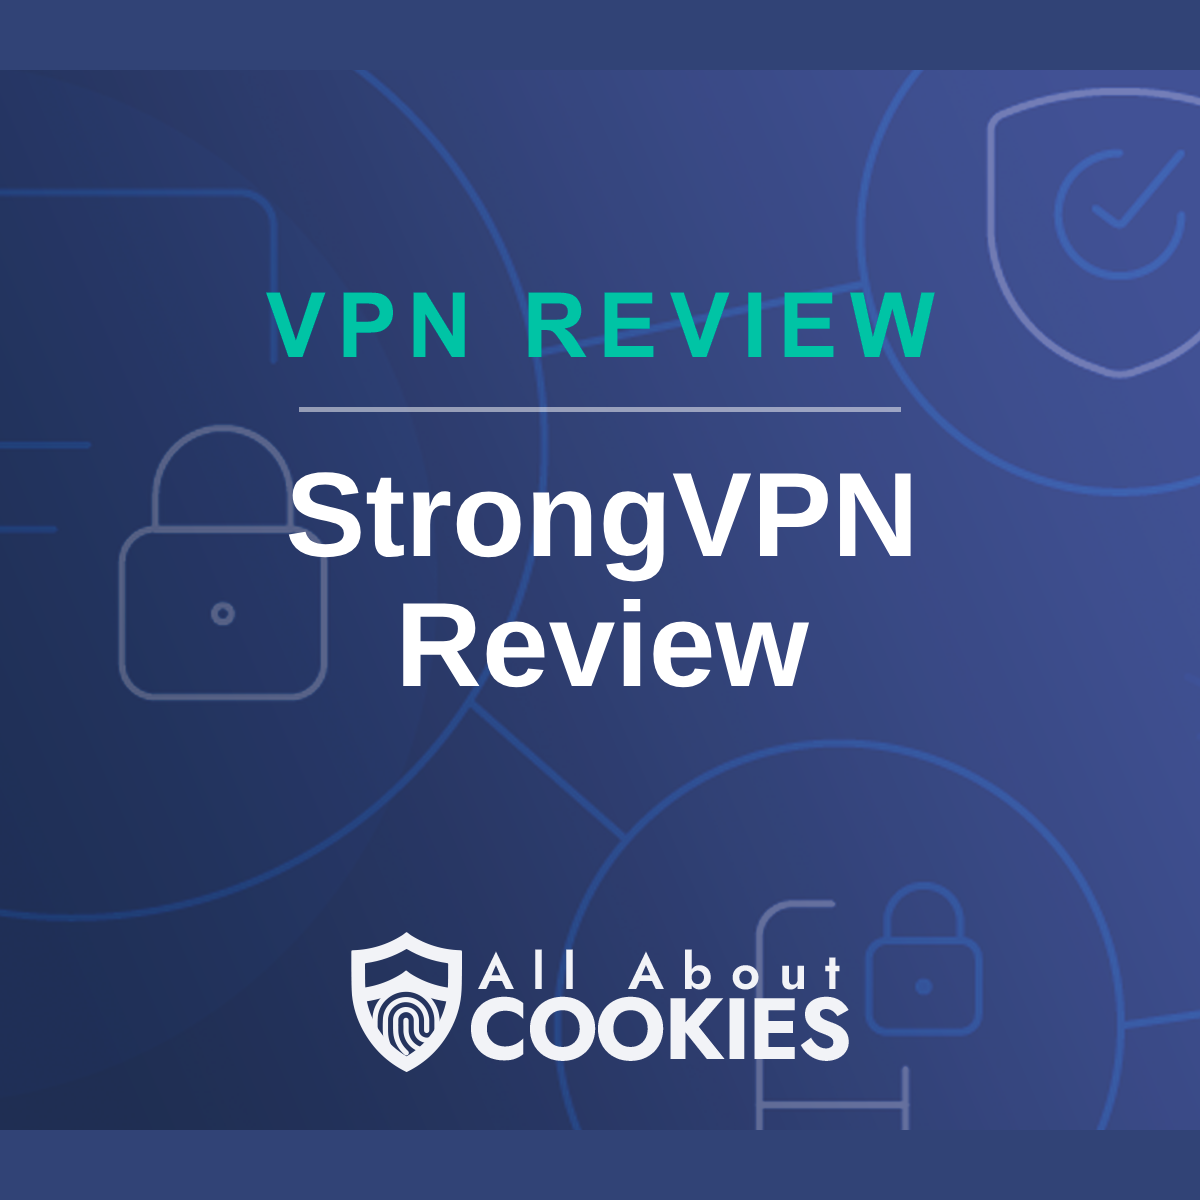 Blue background with text reading &quot;VPN Review Strong VPN Review&quot; and the All About Cookies logo